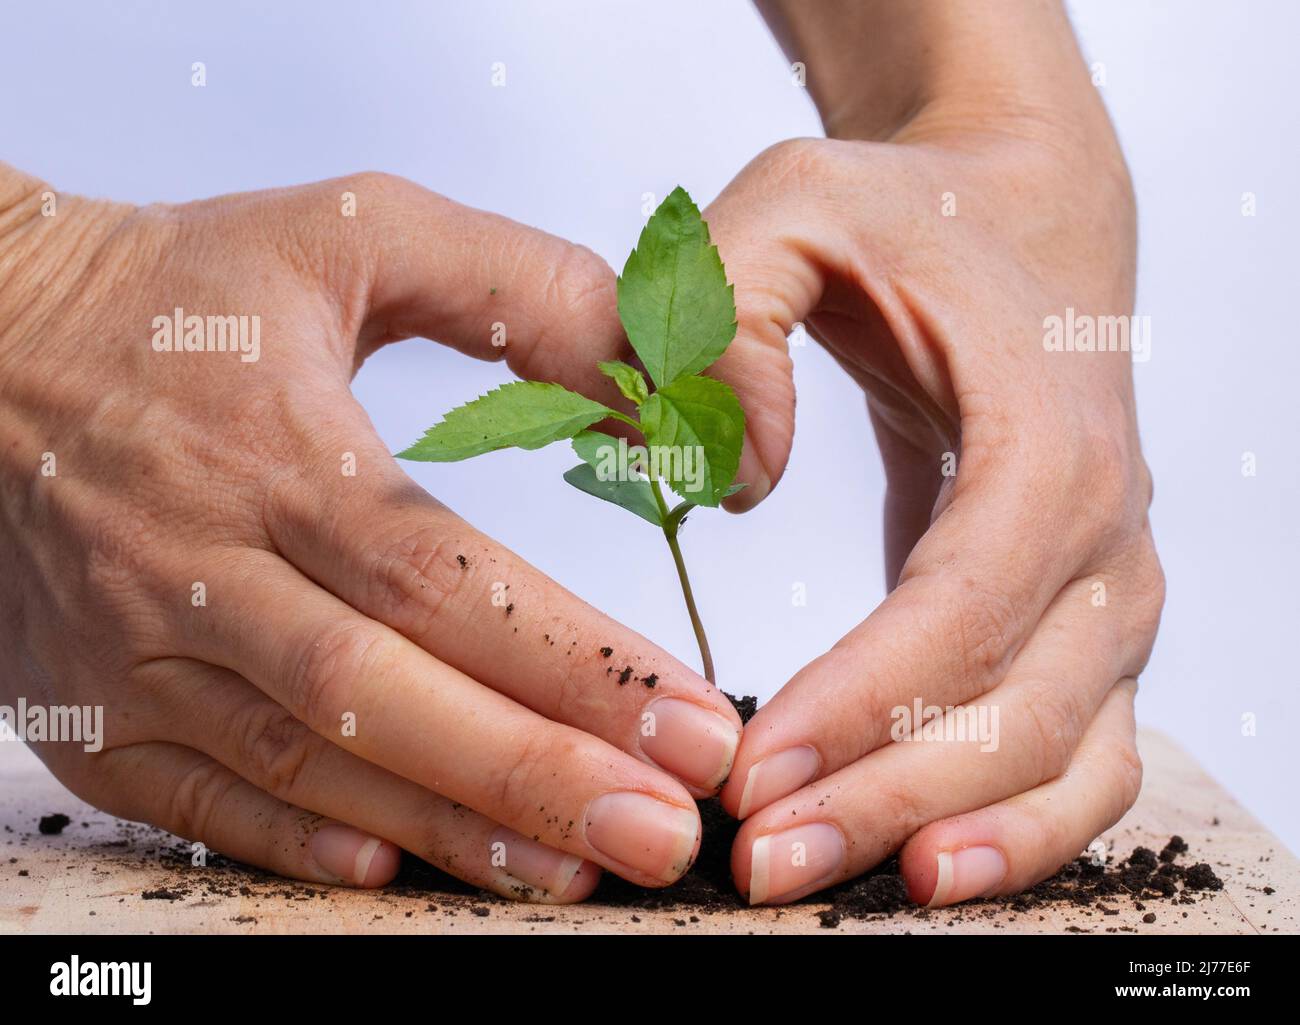 Planting a small apple tree with my own hands Stock Photo